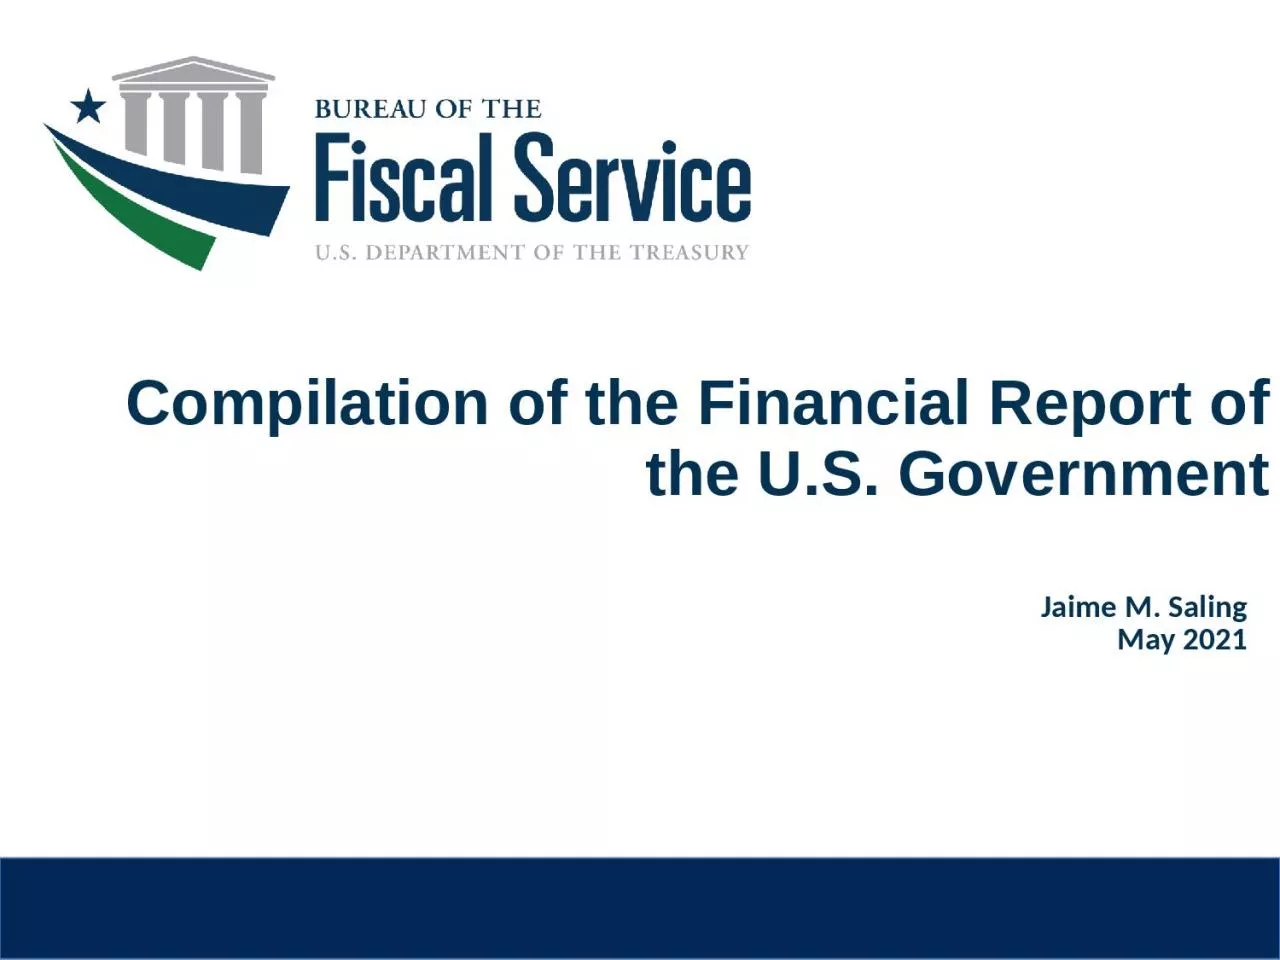 Compilation of the Financial Report of the U.S. Government